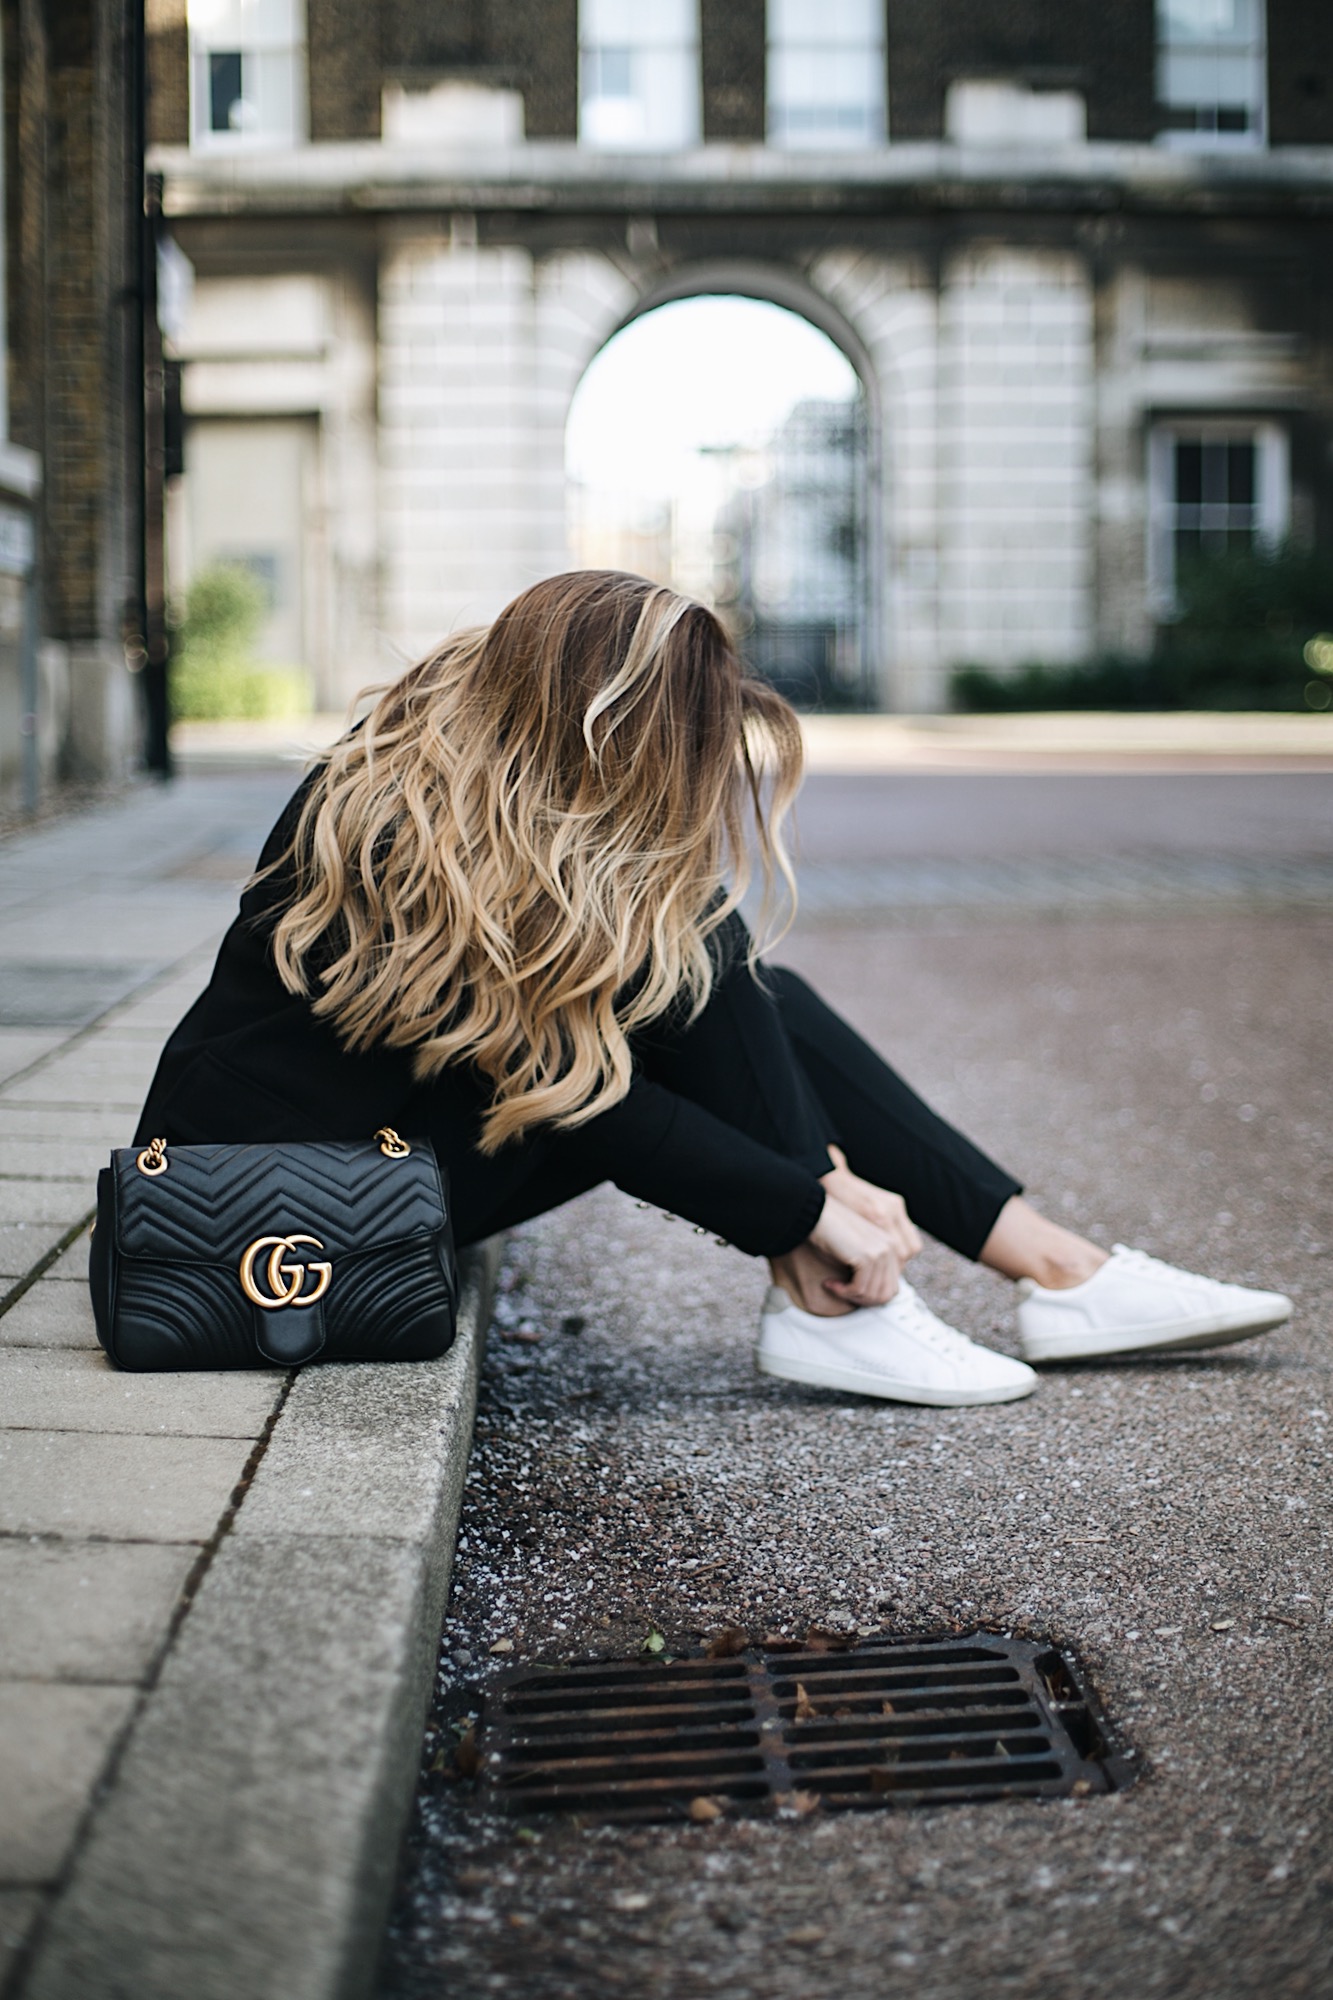 Emma Hill wears Gucci Marmont bag, black tailored trousers, black military jacket, white trainers, chic all black winter outfit